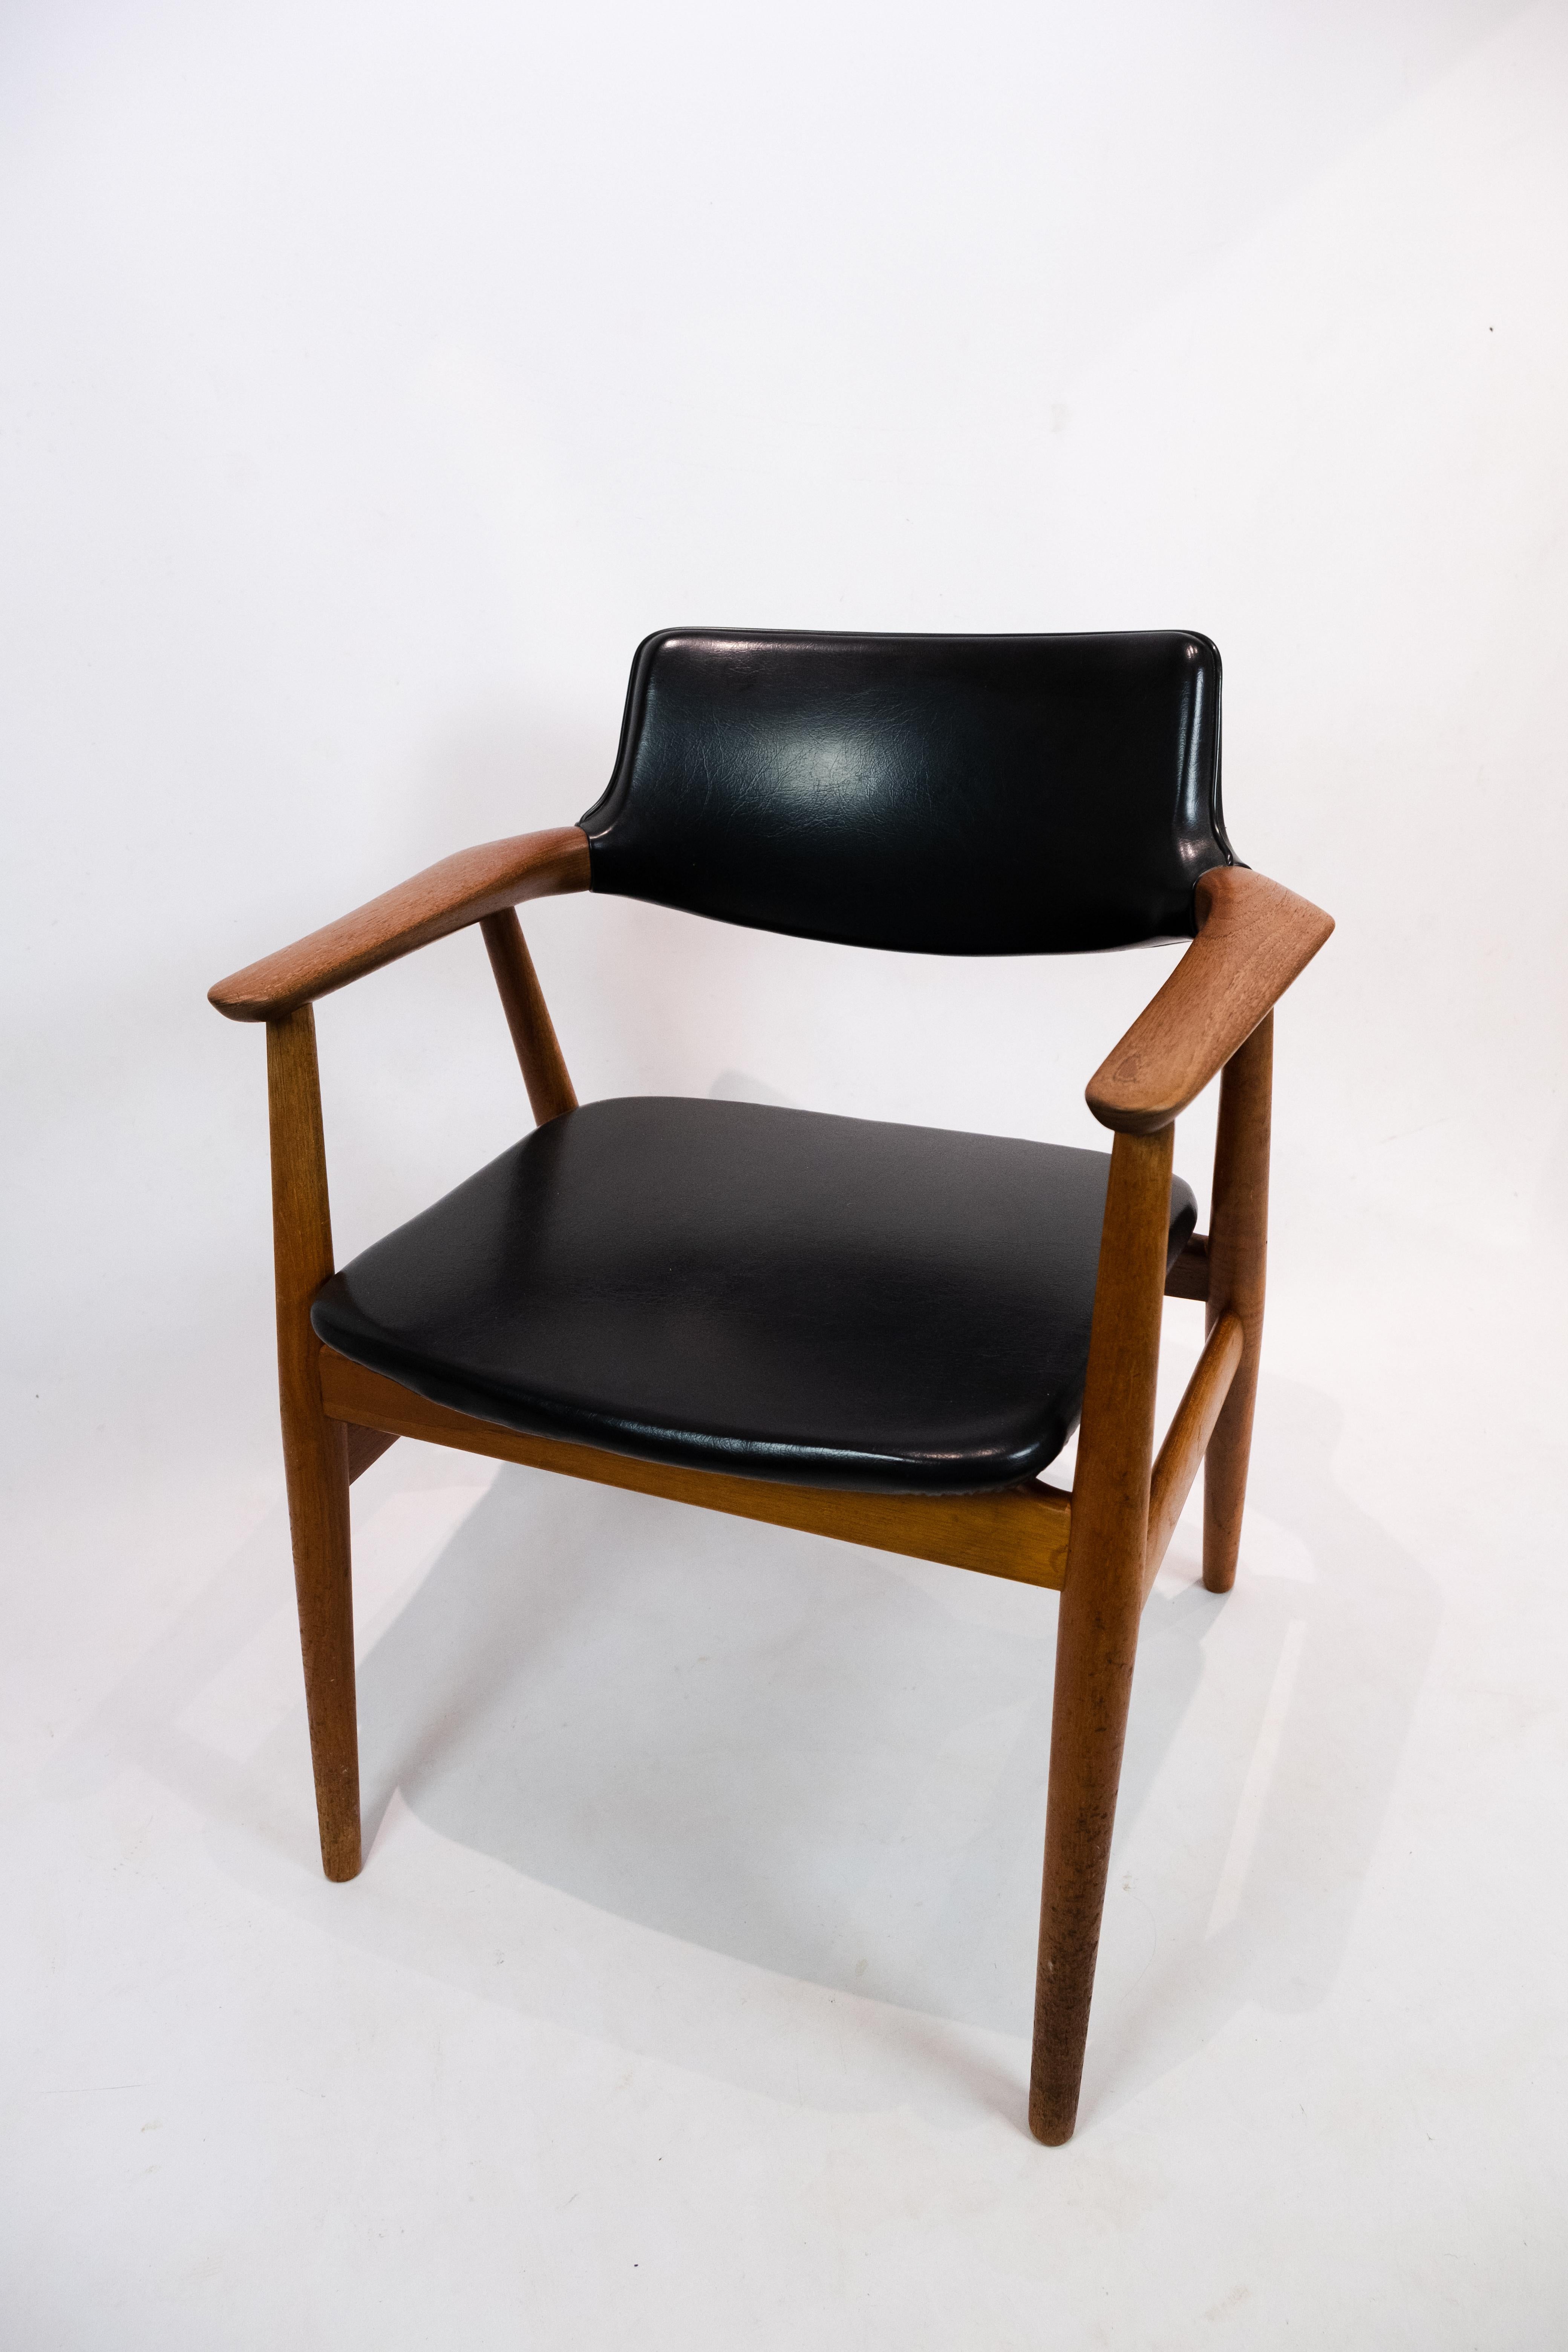 Armchair in teak and black leather designed by Erik Kirkegaard and manufactured by Glostrup Furniture Factory in the 1960s. The chair is in great vintage condition.